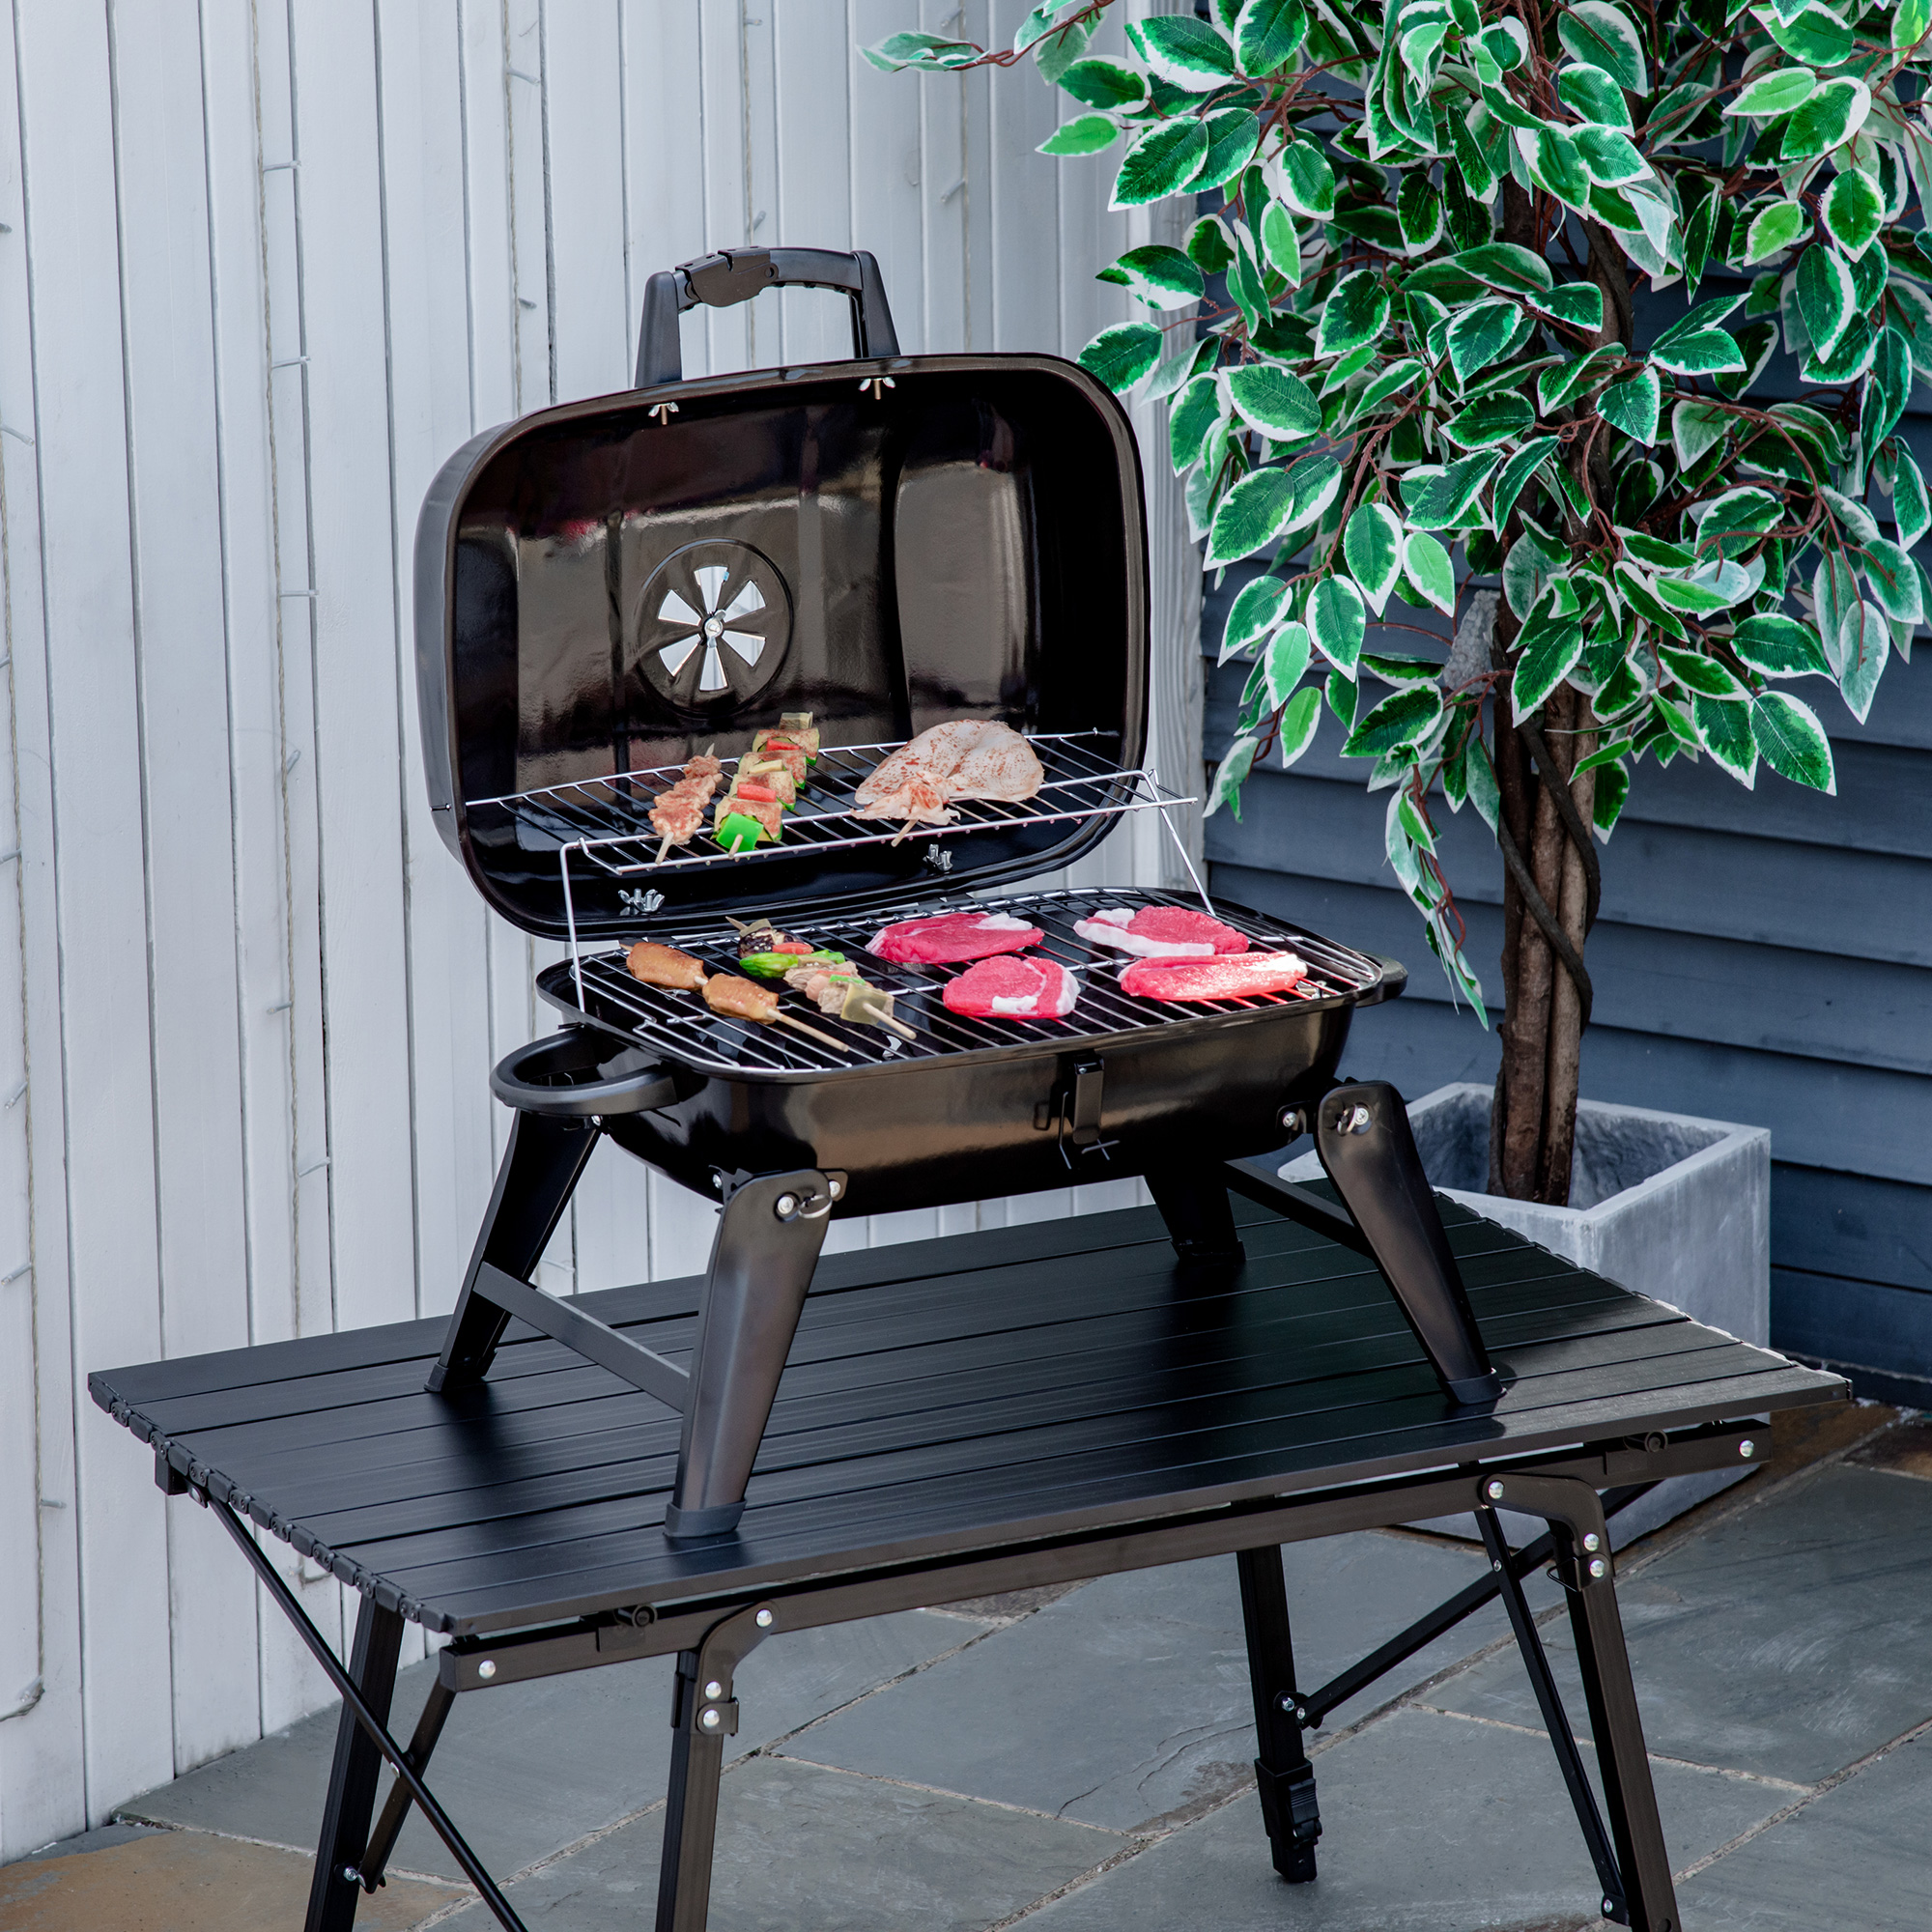 Outsunny 14" Portable Charcoal Grill, Tabletop Small BBQ Grill for Outdoor Cooking, Camping, Tailgating, Enamel Coated, Vent, Folding Legs, Black - image 2 of 9